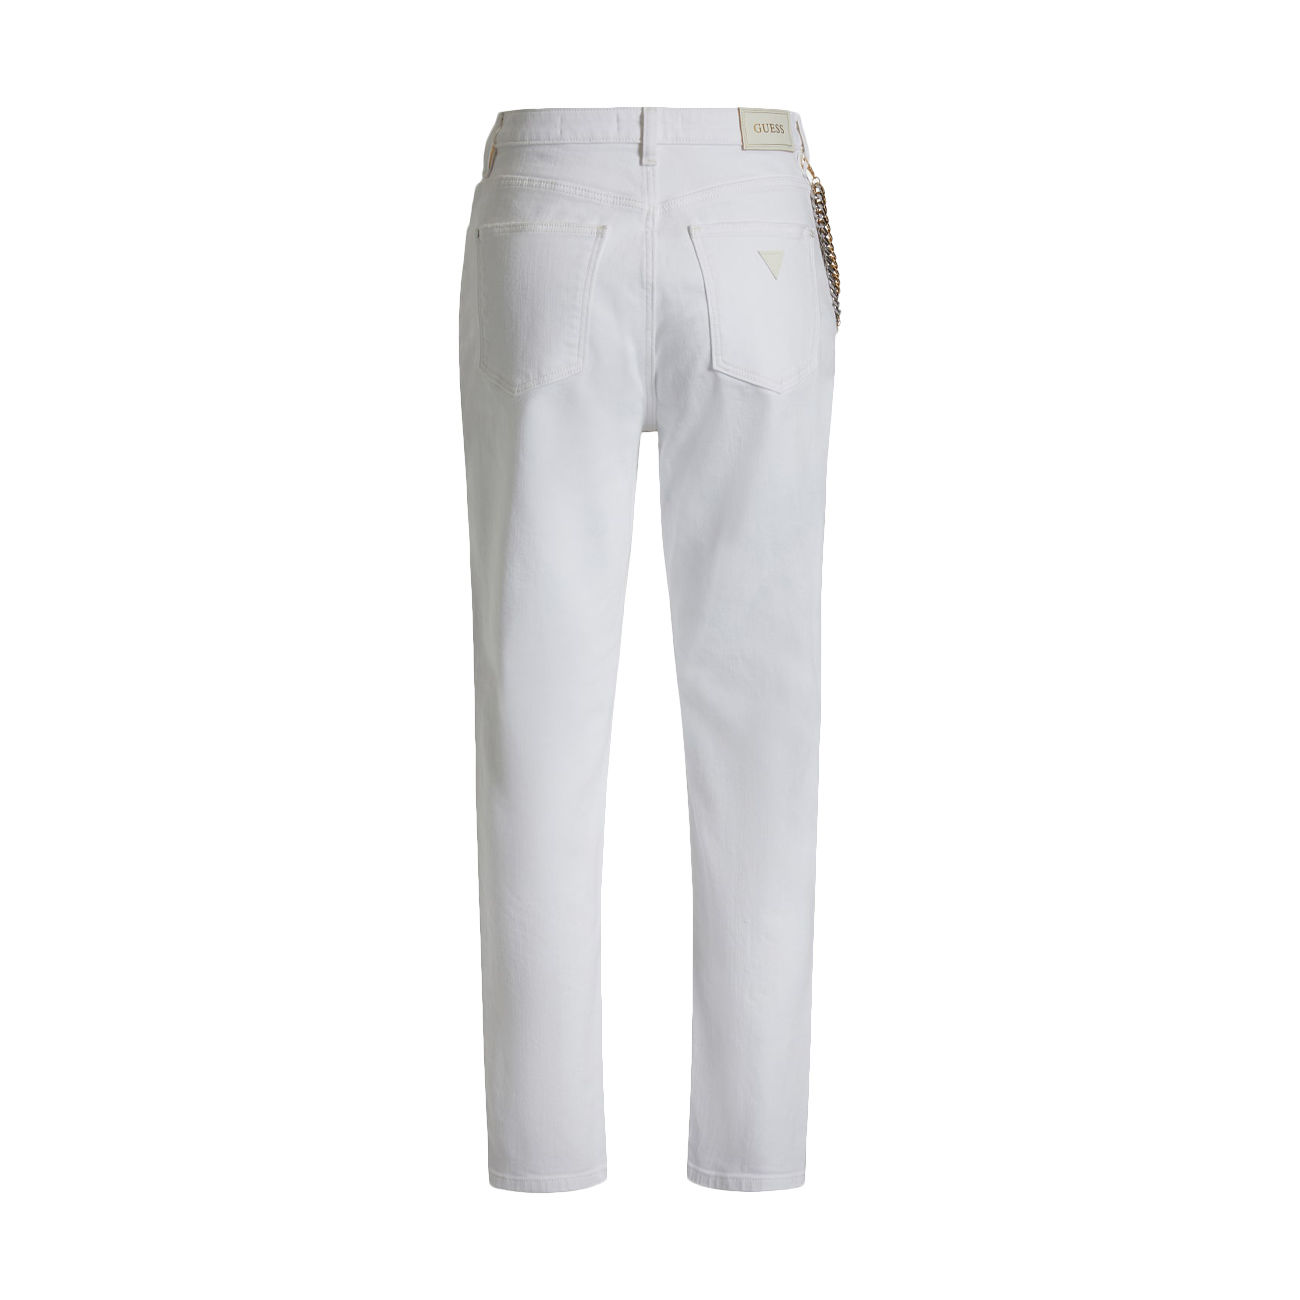 GUESS JEANS WITH Woman Optic White | Mascheroni Store